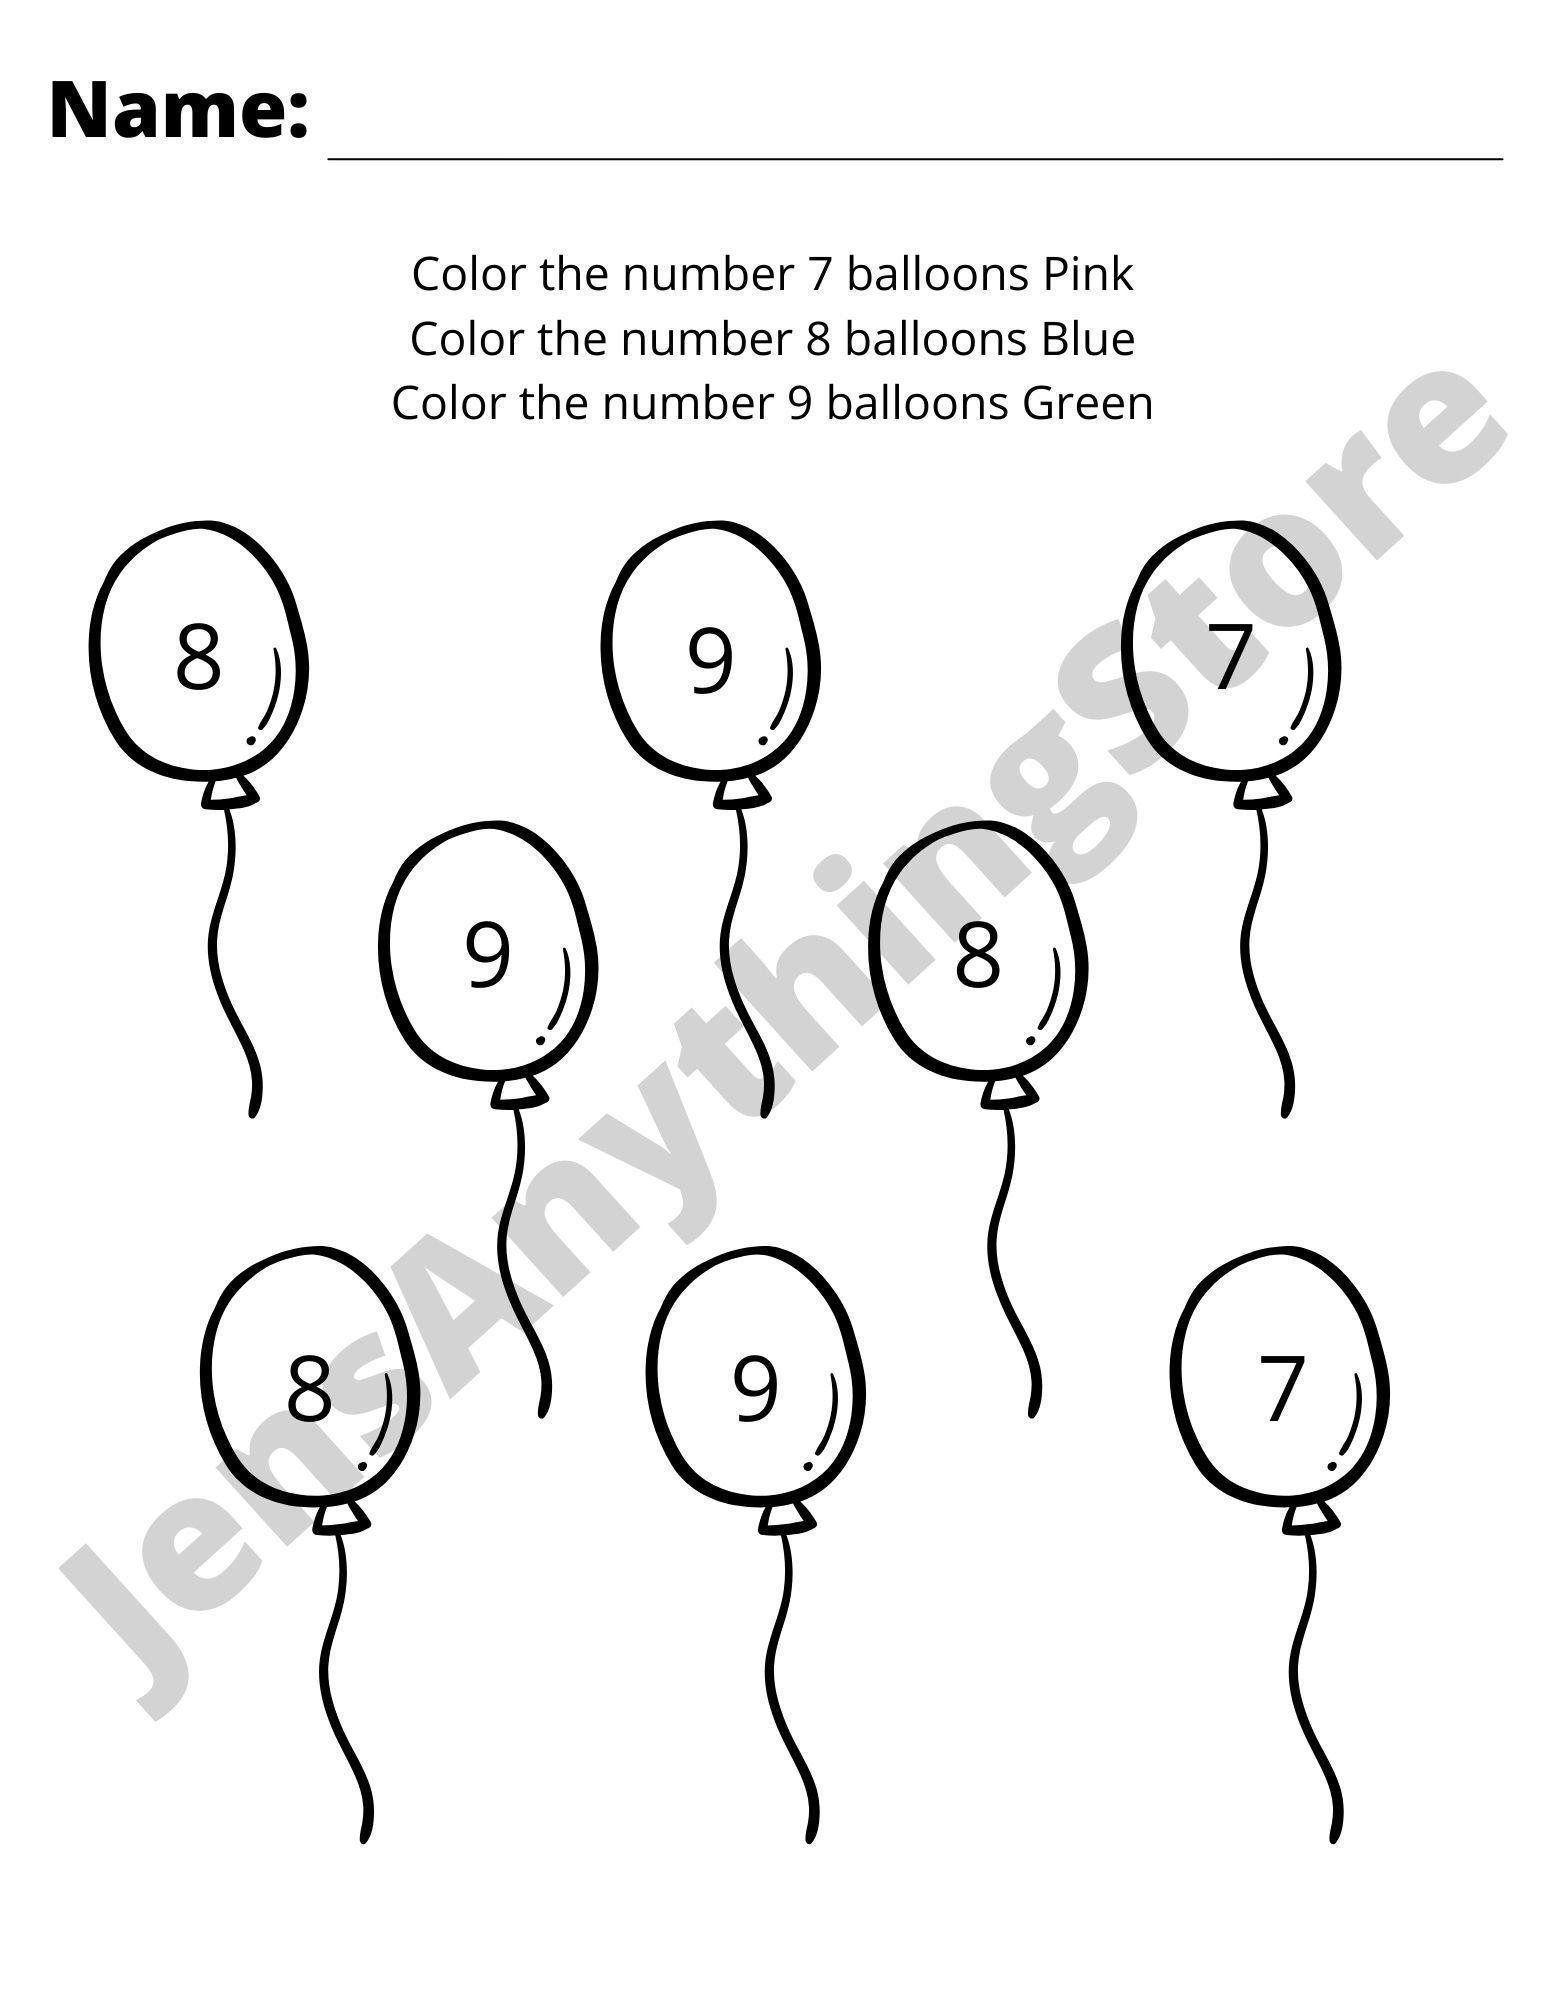 Unicorn Color By Number [Numbers 1-9] Coloring Pages